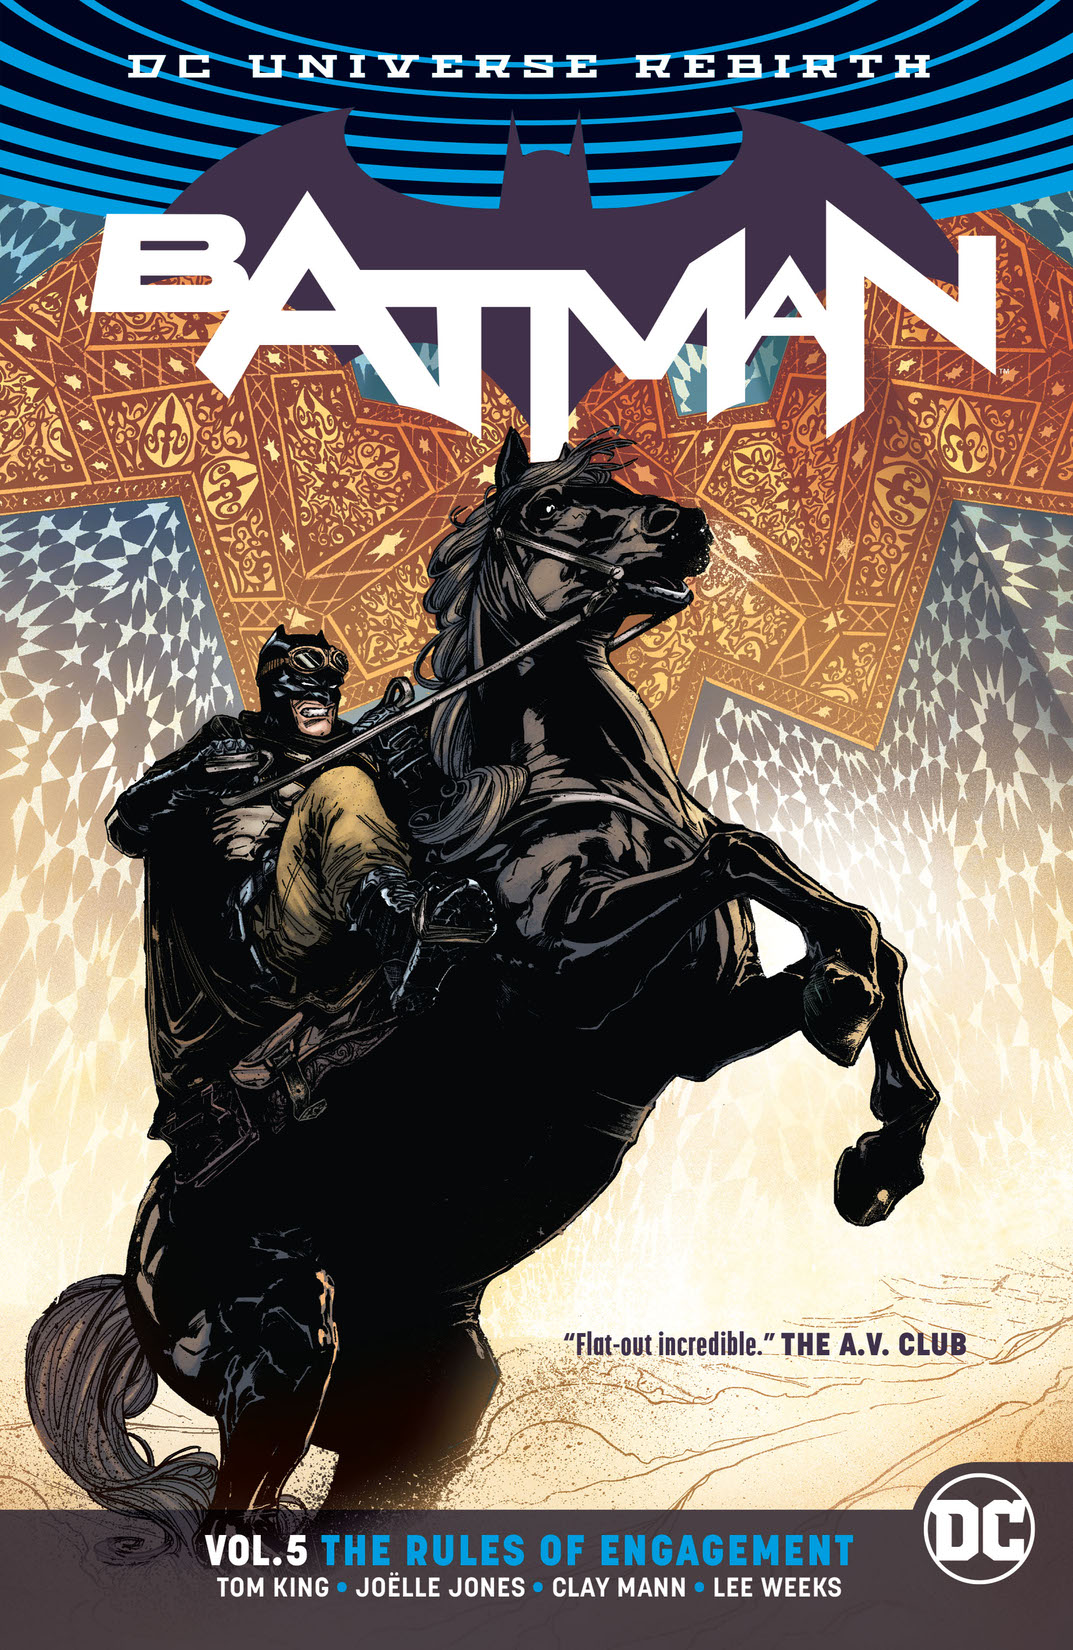 Batman Vol. 5: The Rules of Engagement  preview images